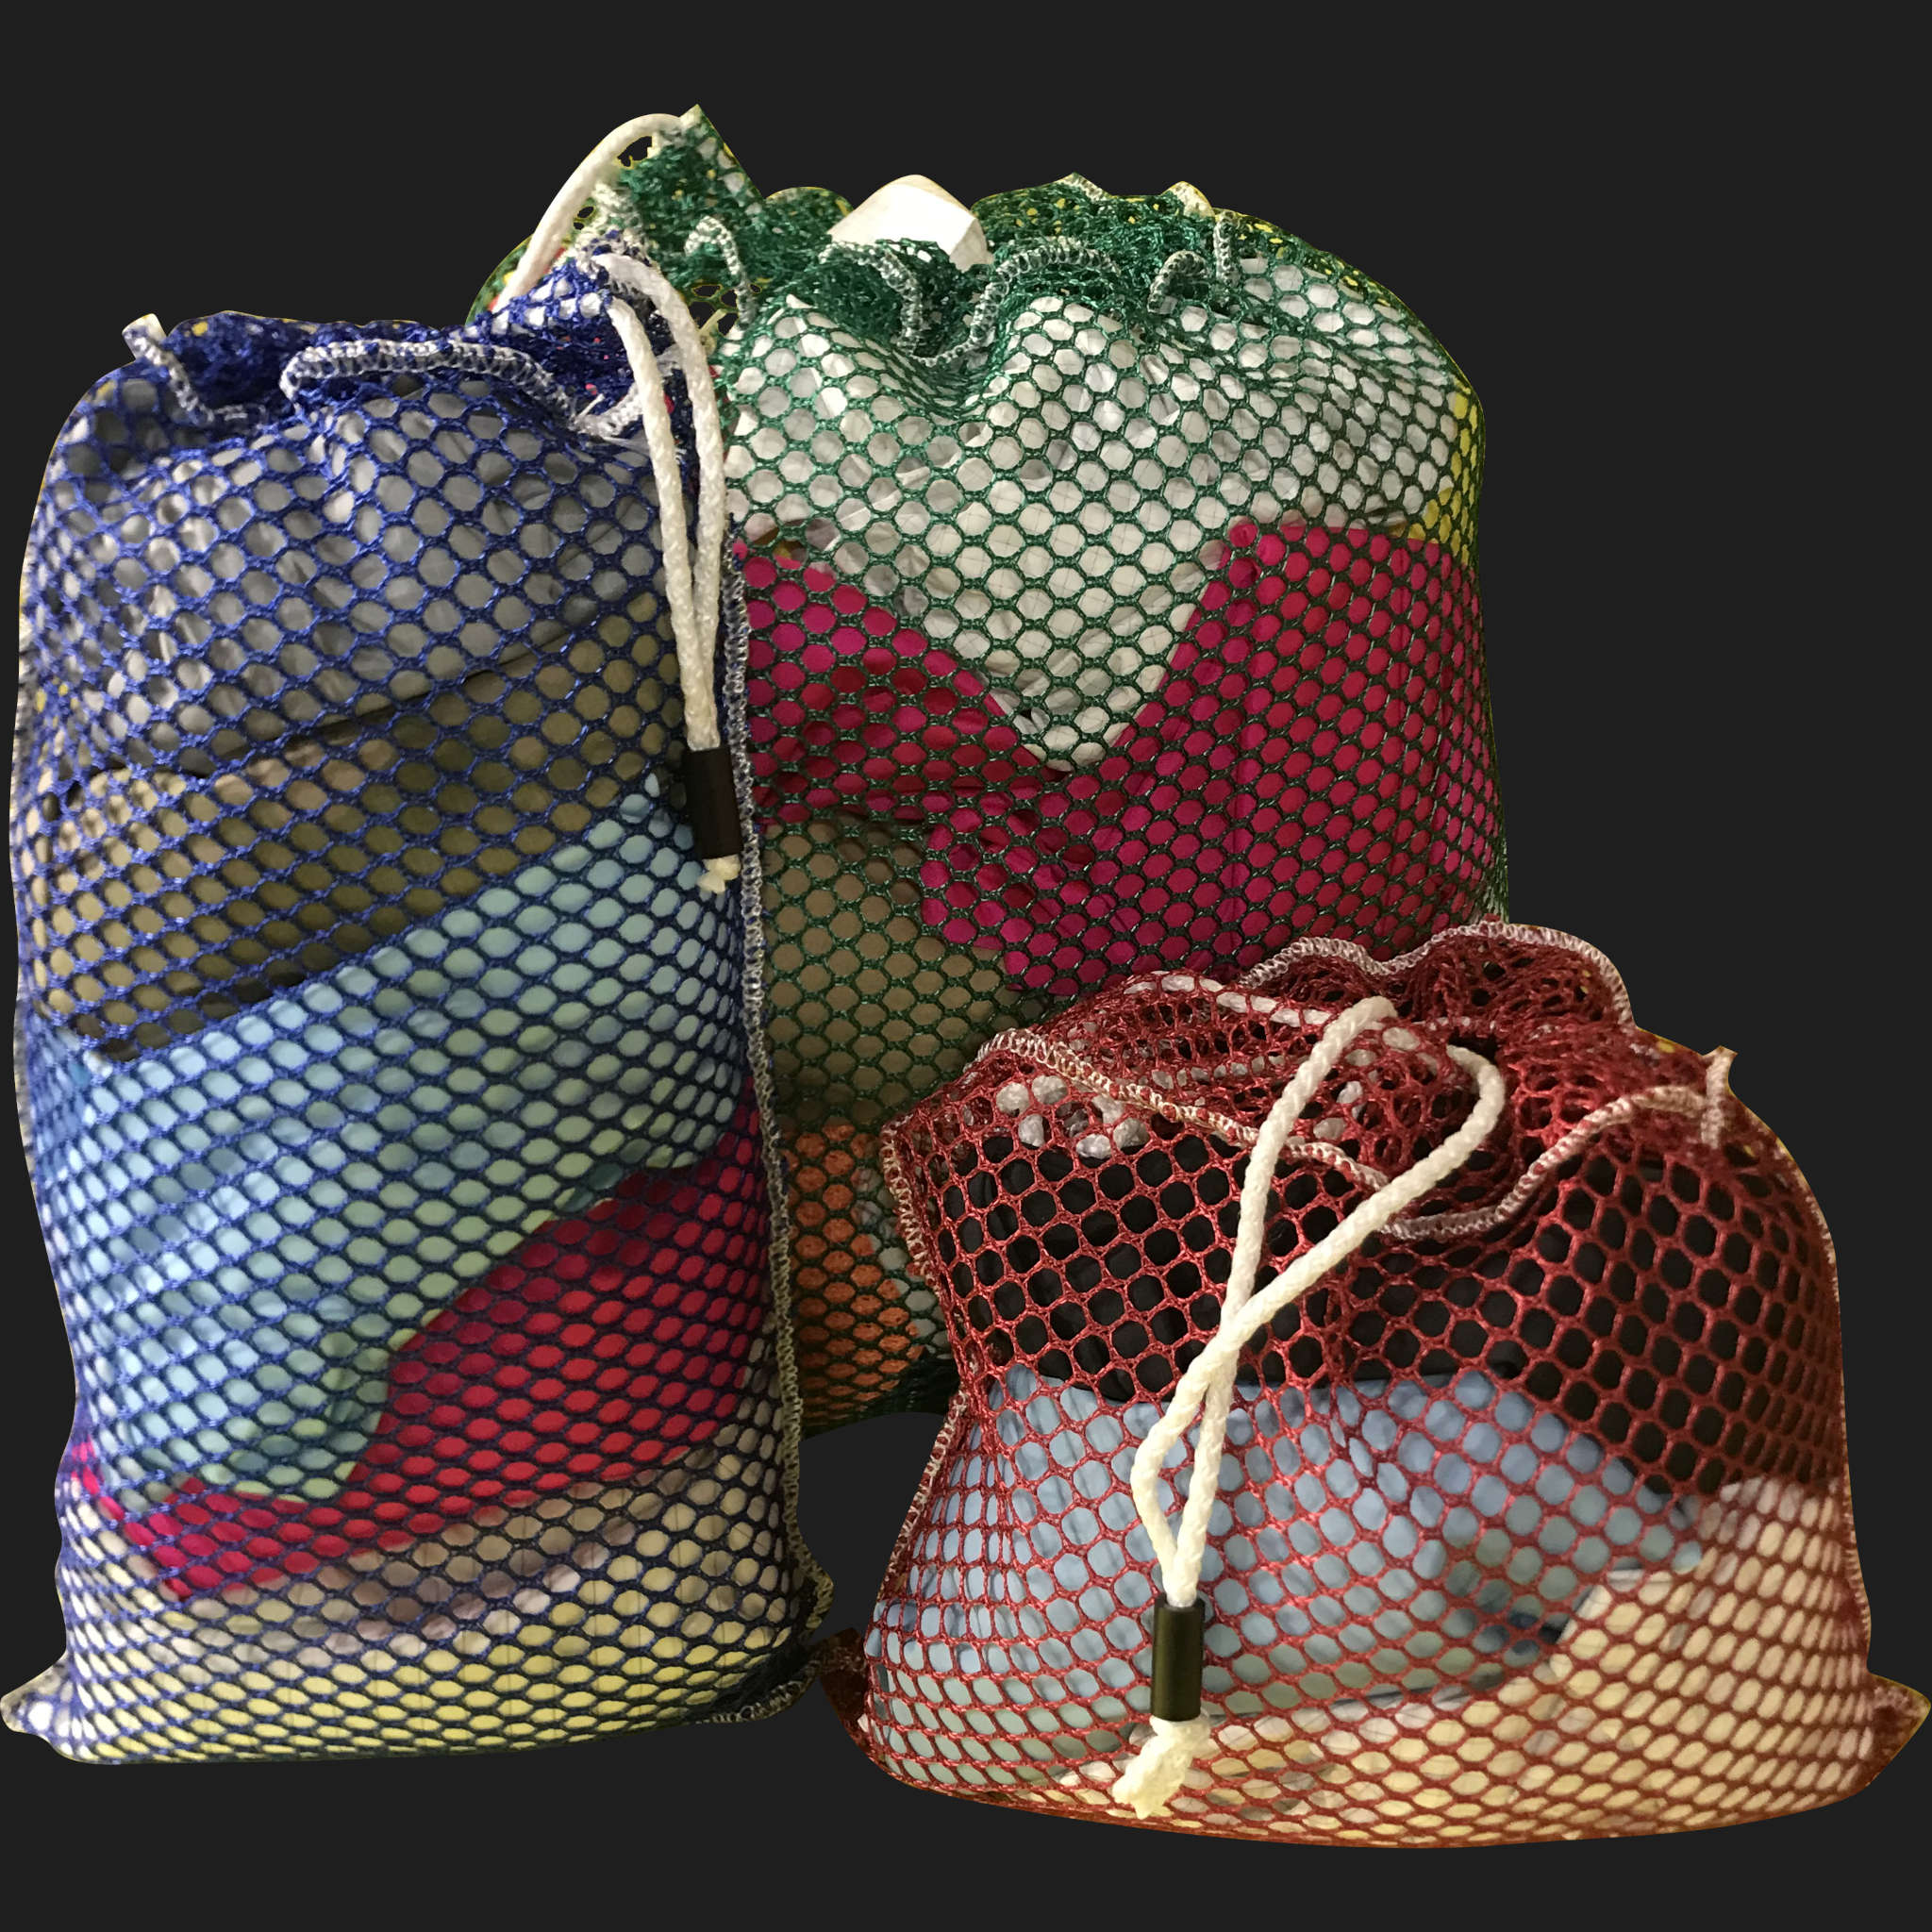 44" x 52" Customized Mesh-Net-Laundry Bags Heavy Duty with Cord and barrellock closure